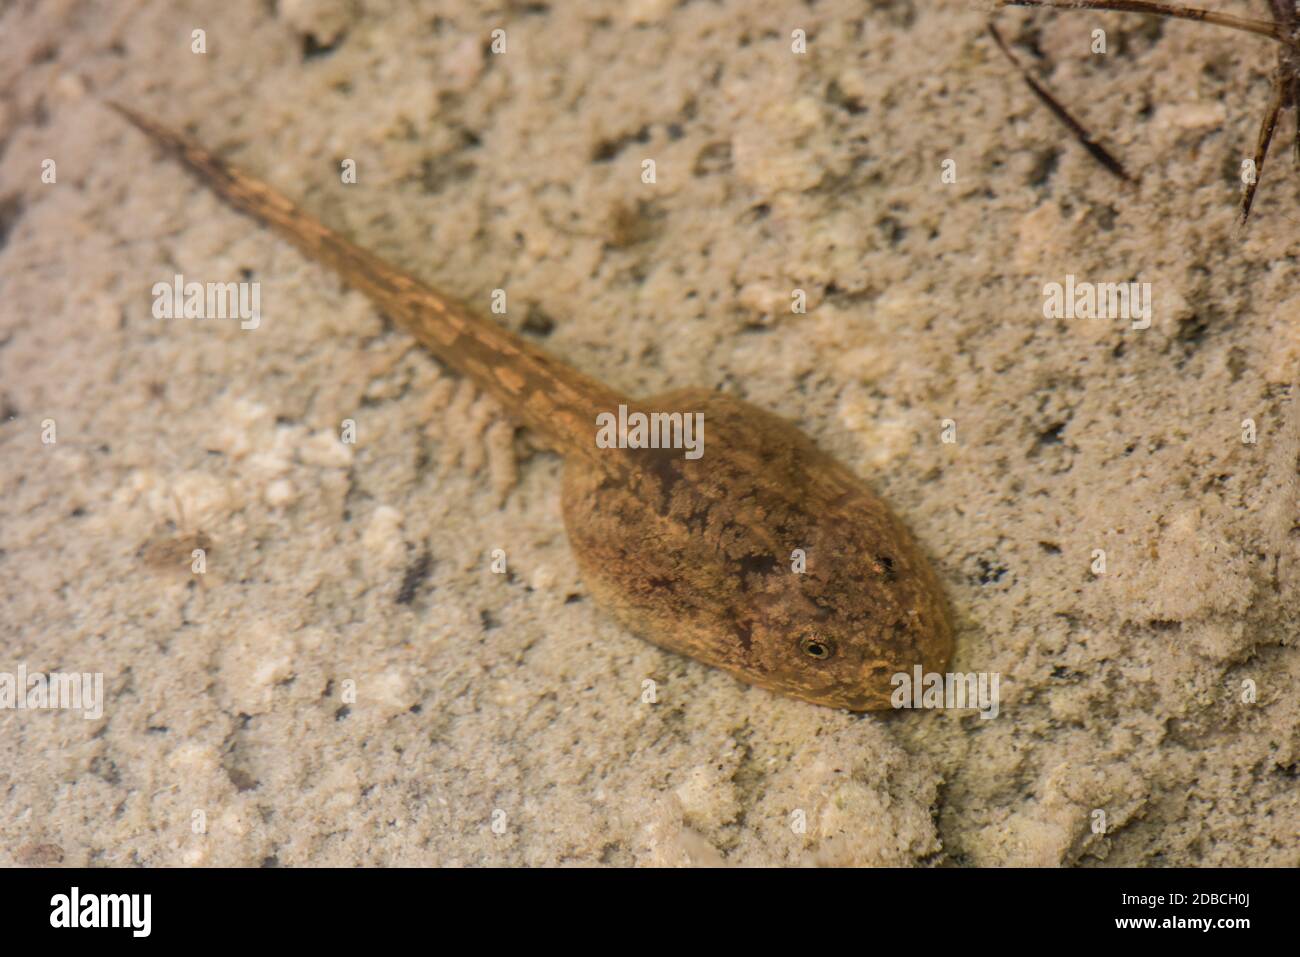 A tadpole of the marbled water frog (Telmatobius marmoratus) from the high Andes of Peru. Stock Photo